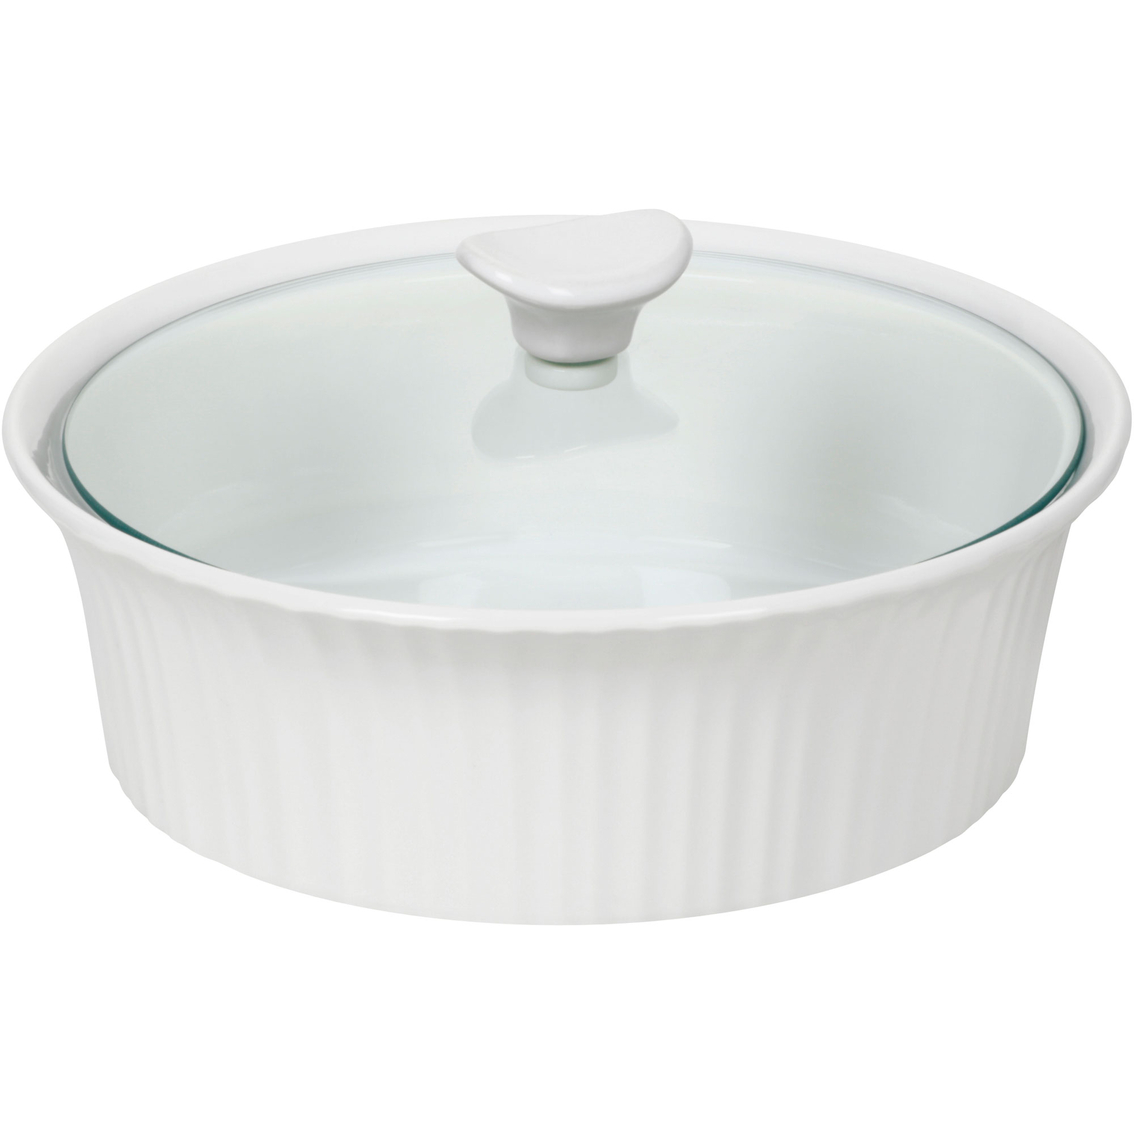 Rubbermaid DuraLite Glass Bakeware, 2.5 qt Baking Dish, Cake Pan, or Casserole Dish with Lid